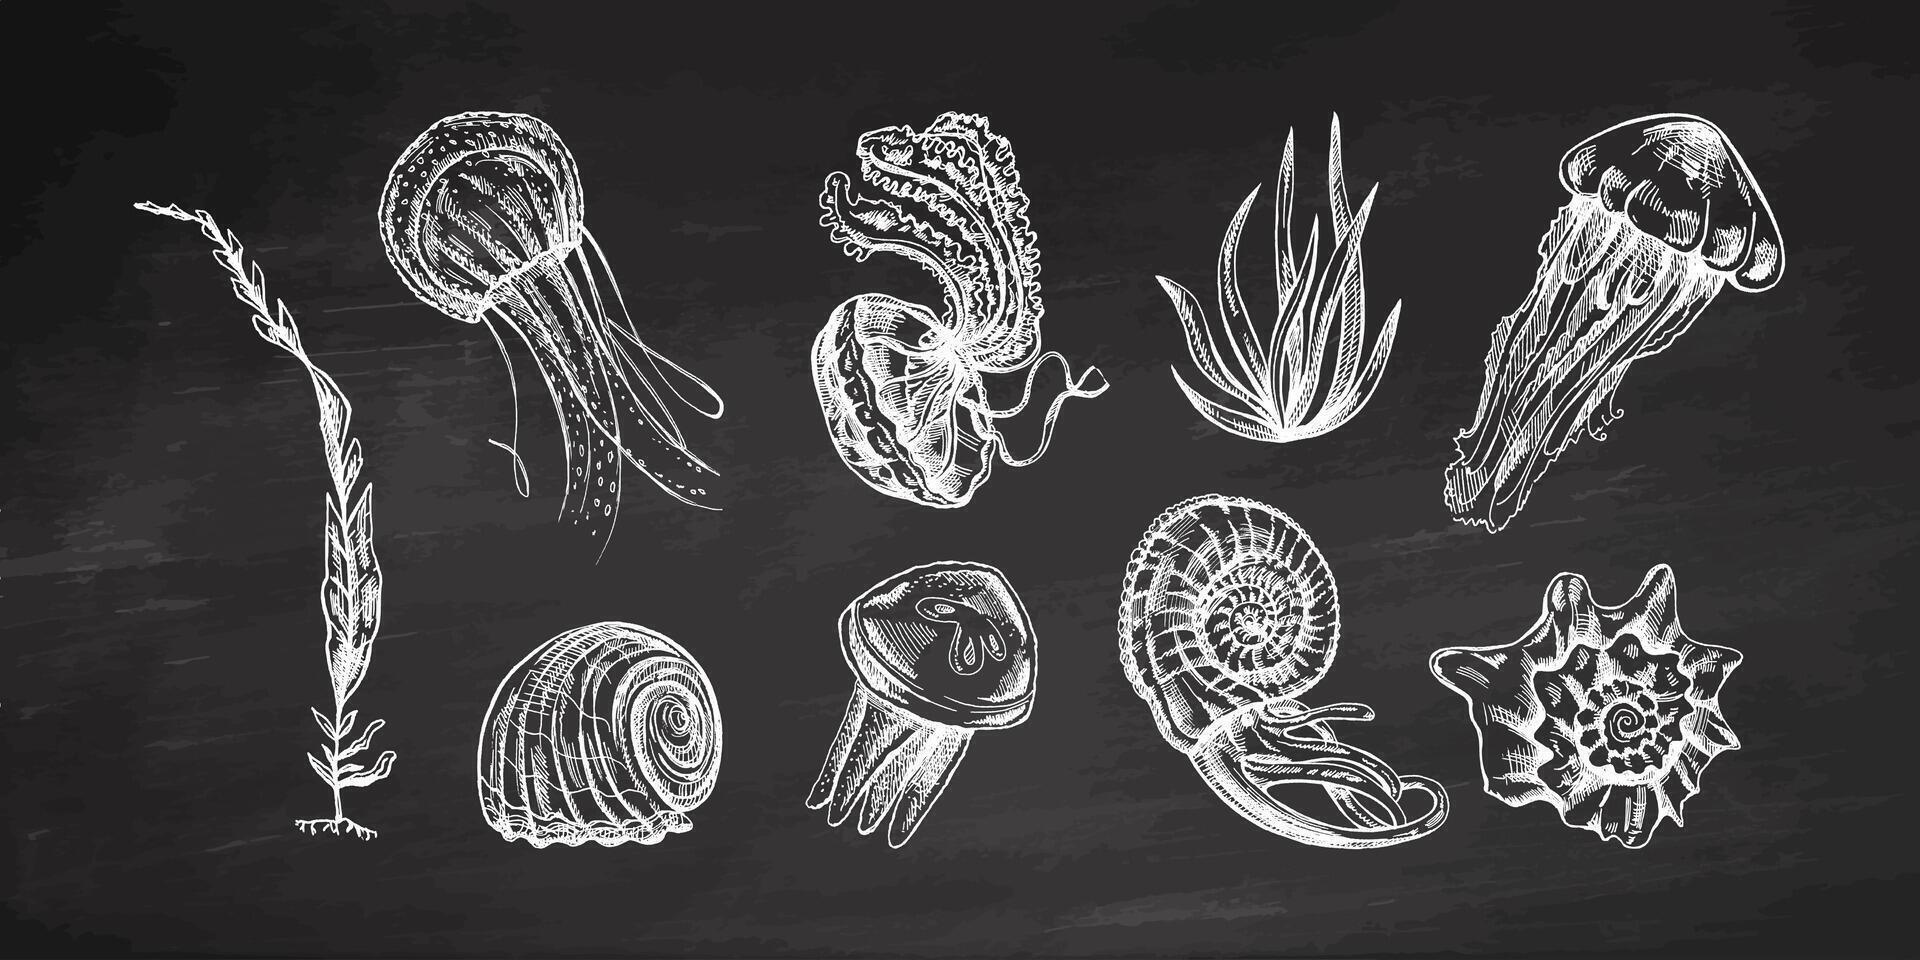 Seashells, jellyfishes, ammonite, nautilus mollusc, seaweed vector set. Hand-drawn sketch illustration on chalkboard background. Collection of realistic sketches of various ocean creatures.